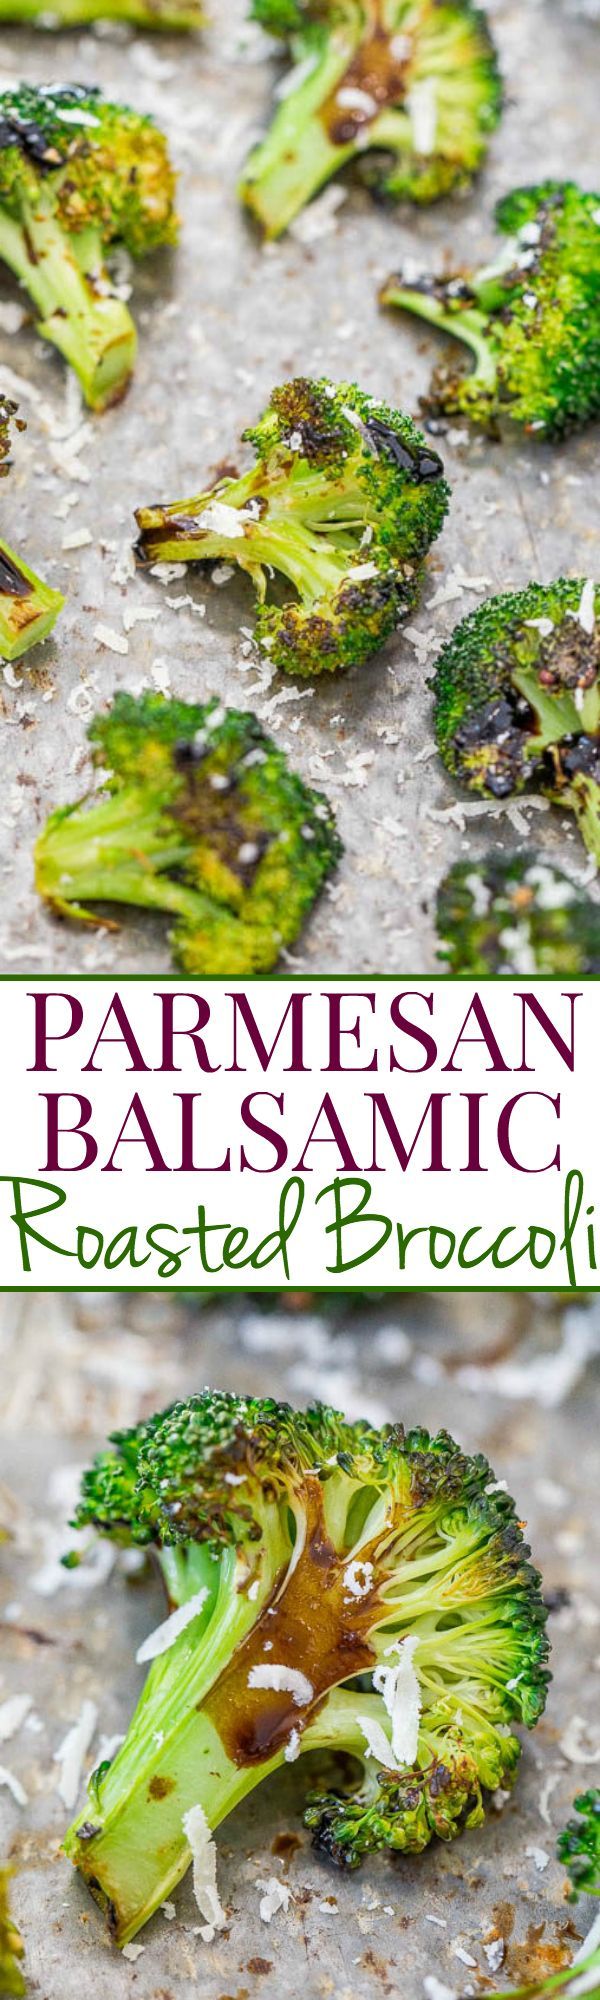 Parmesan Balsamic Roasted Broccoli – Even people who don’t like to eat their veggies will LOVE broccoli prepared this way!! Easy,